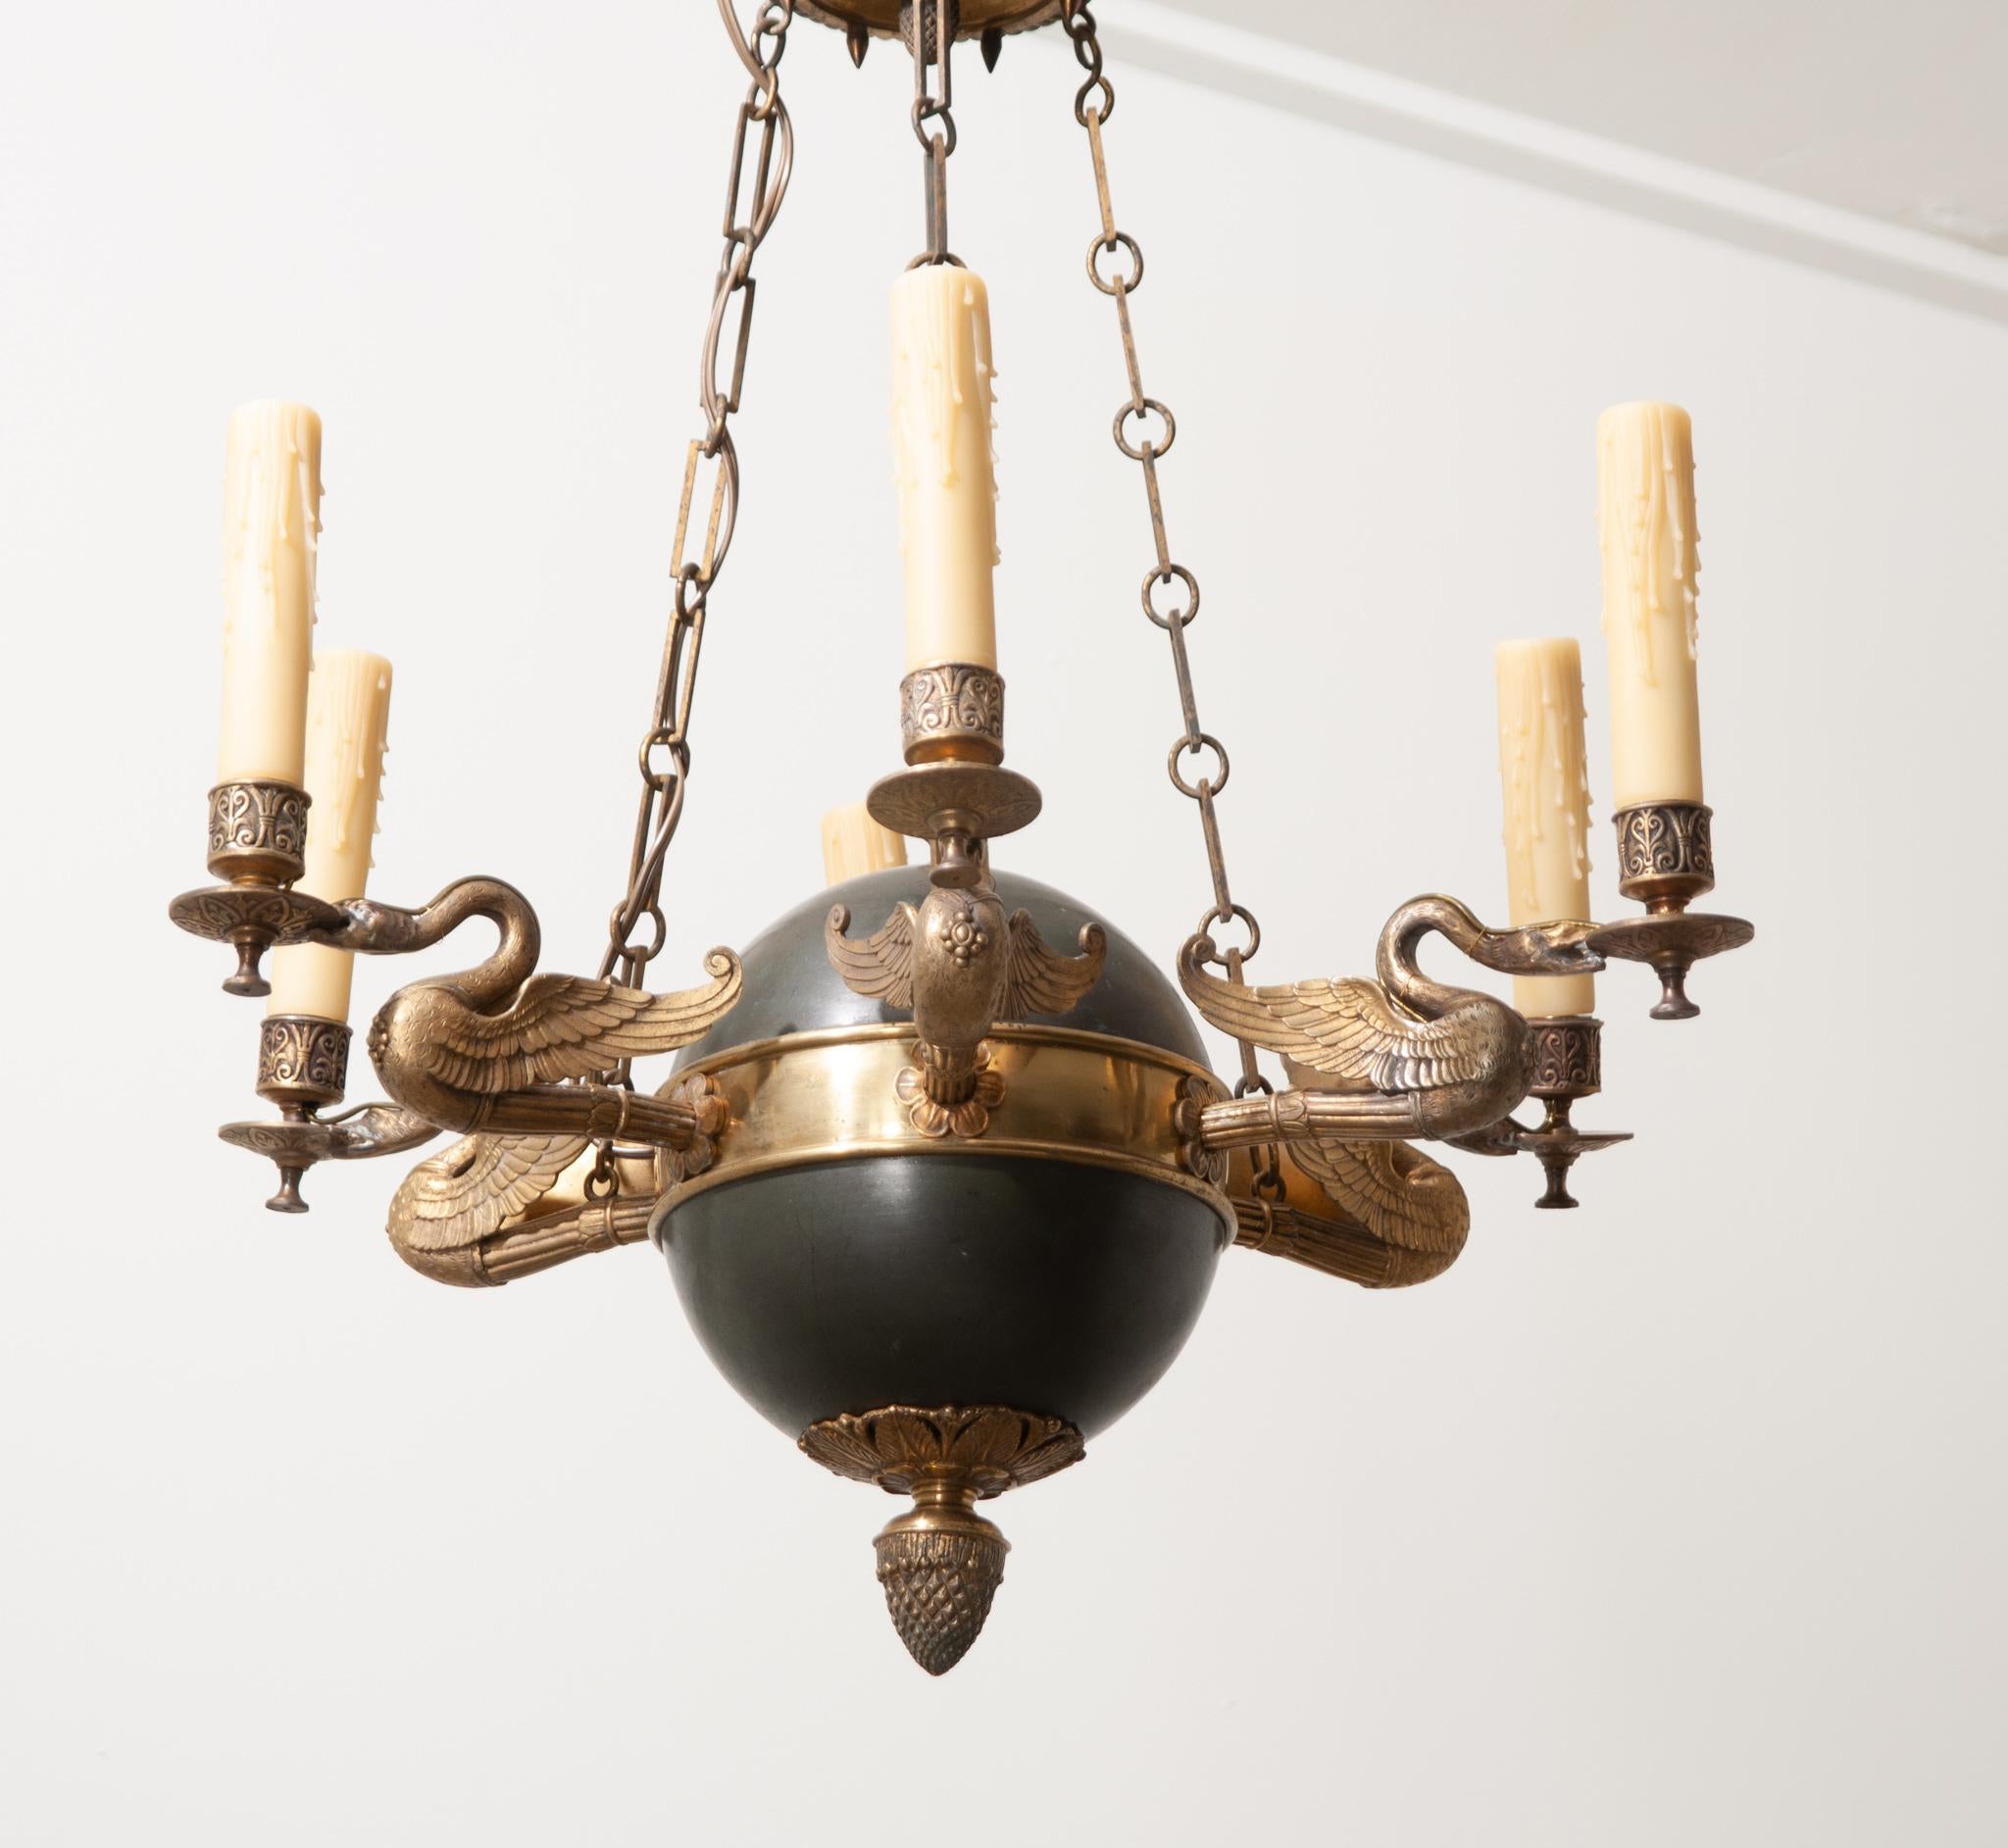 Cast French 19th Century Empire Chandelier with Swans